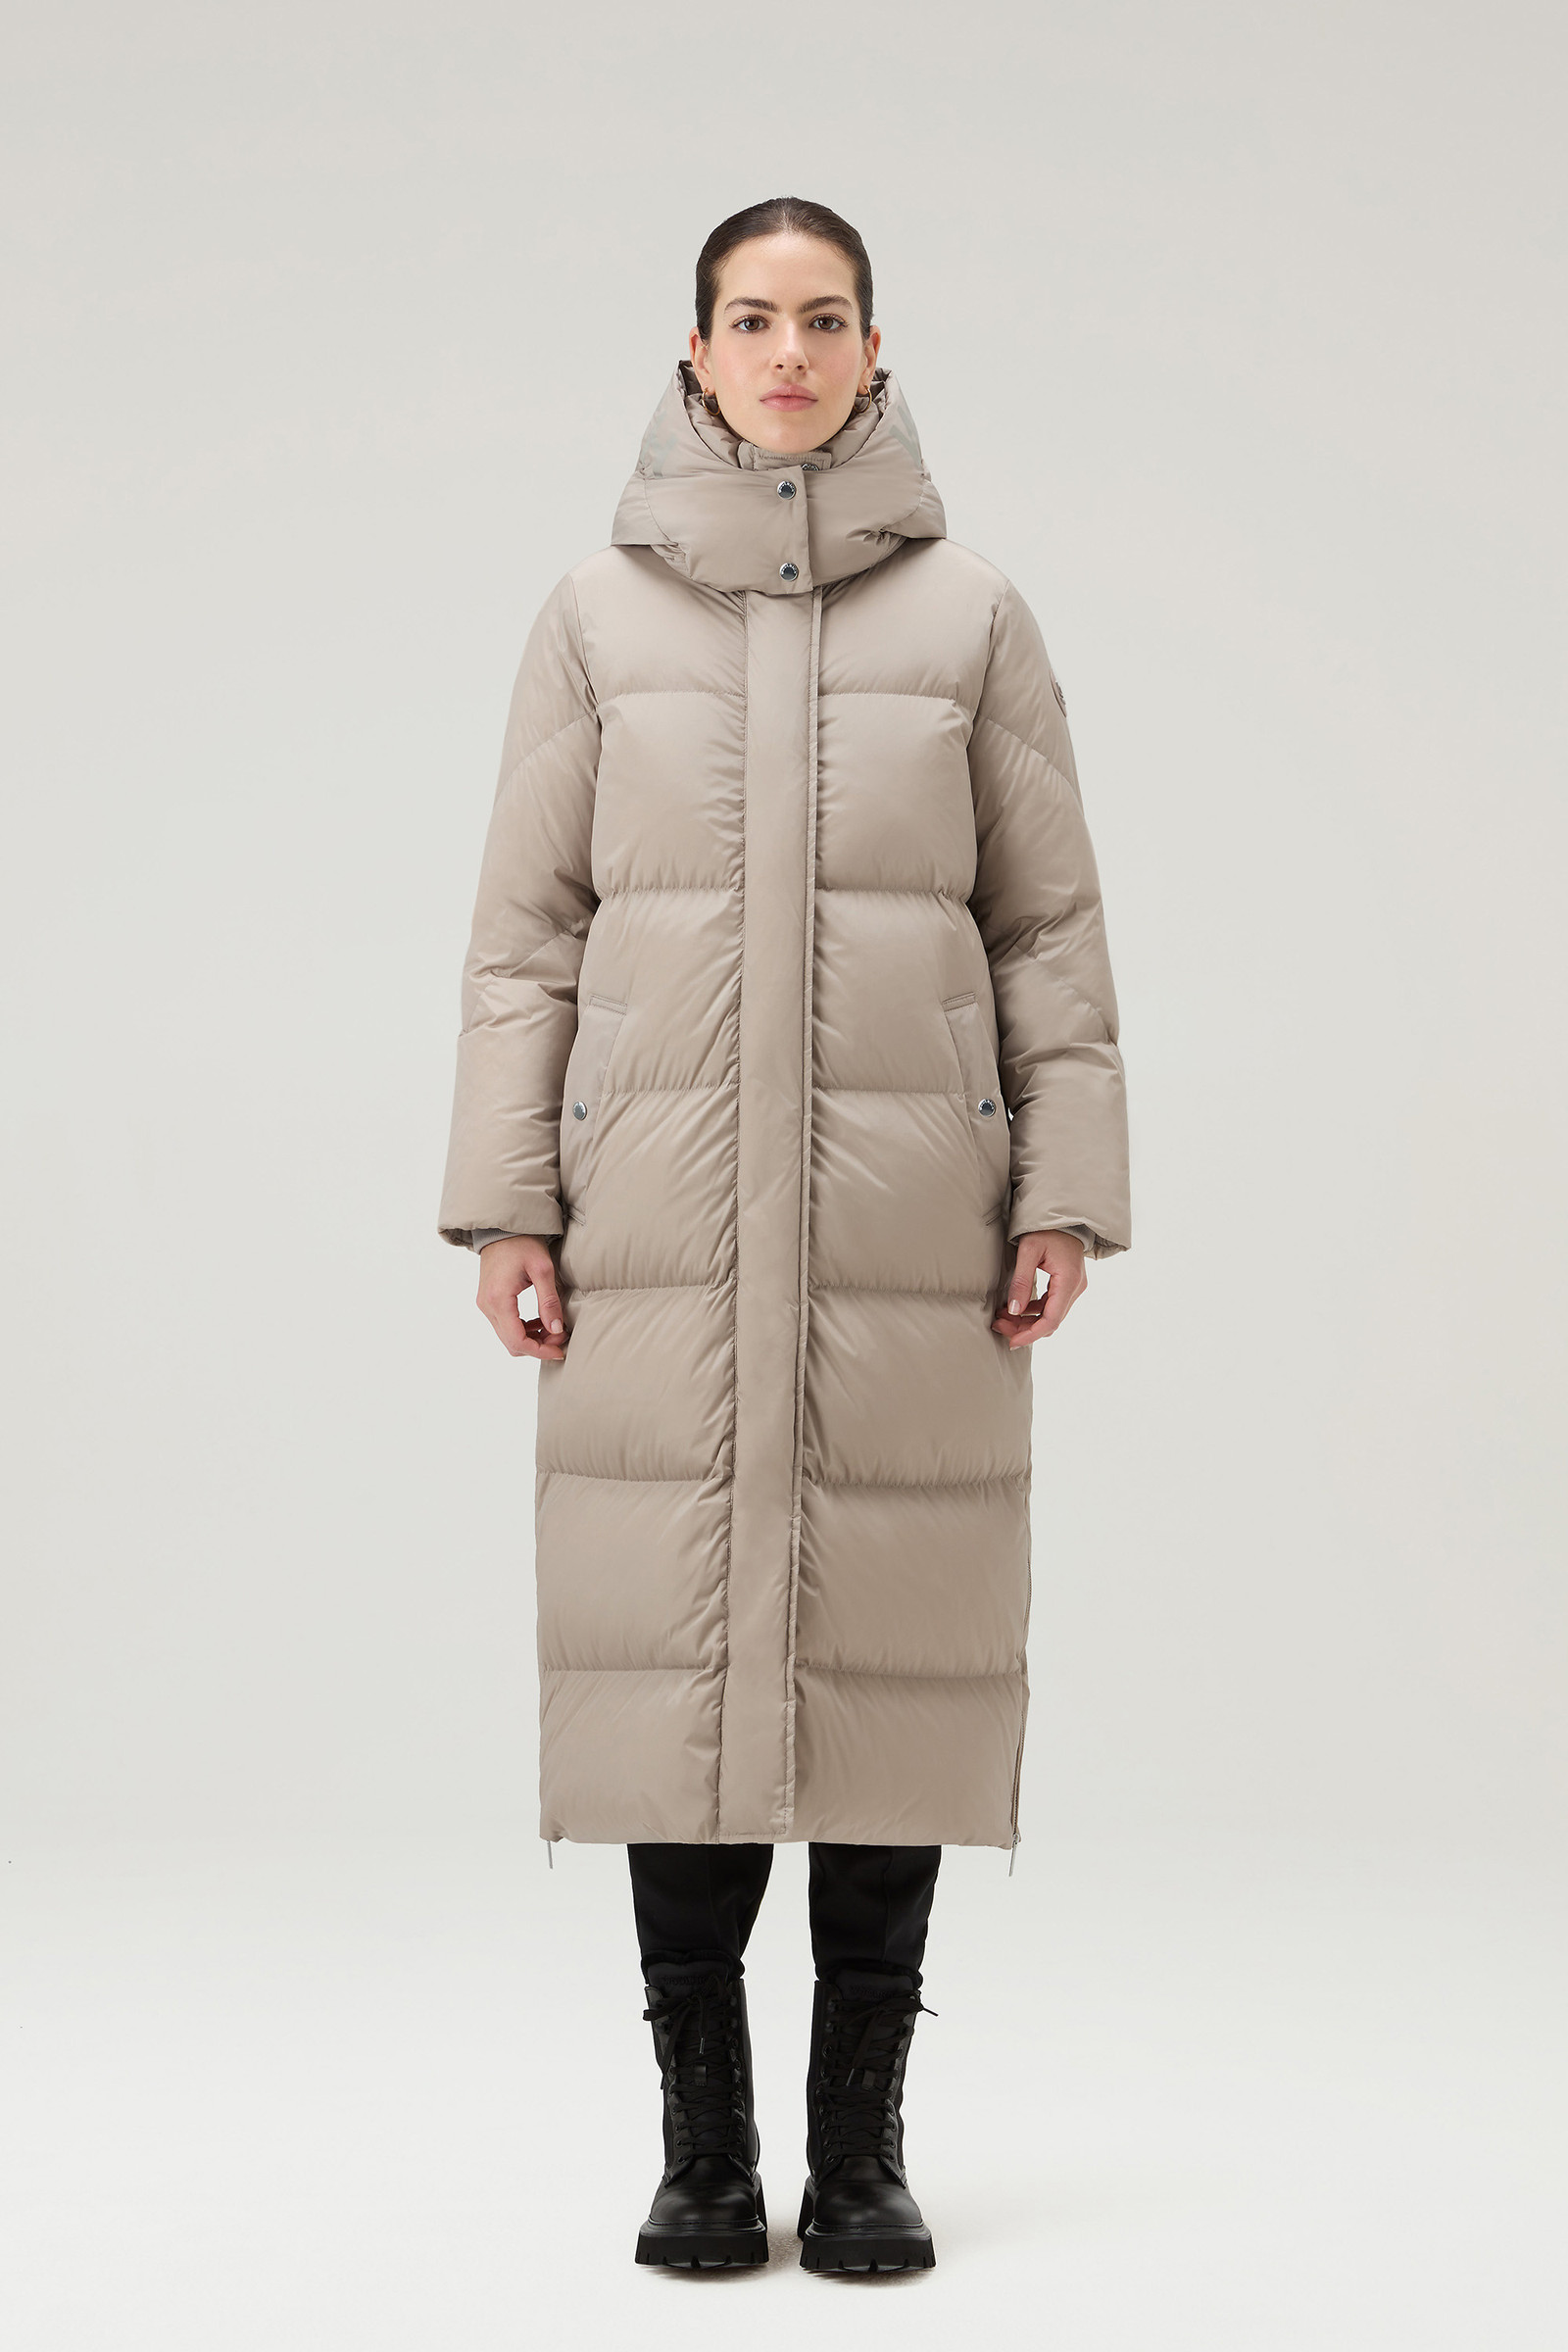 Women's Aurora Long Parka in Stretch Nylon Taupe | Woolrich USA